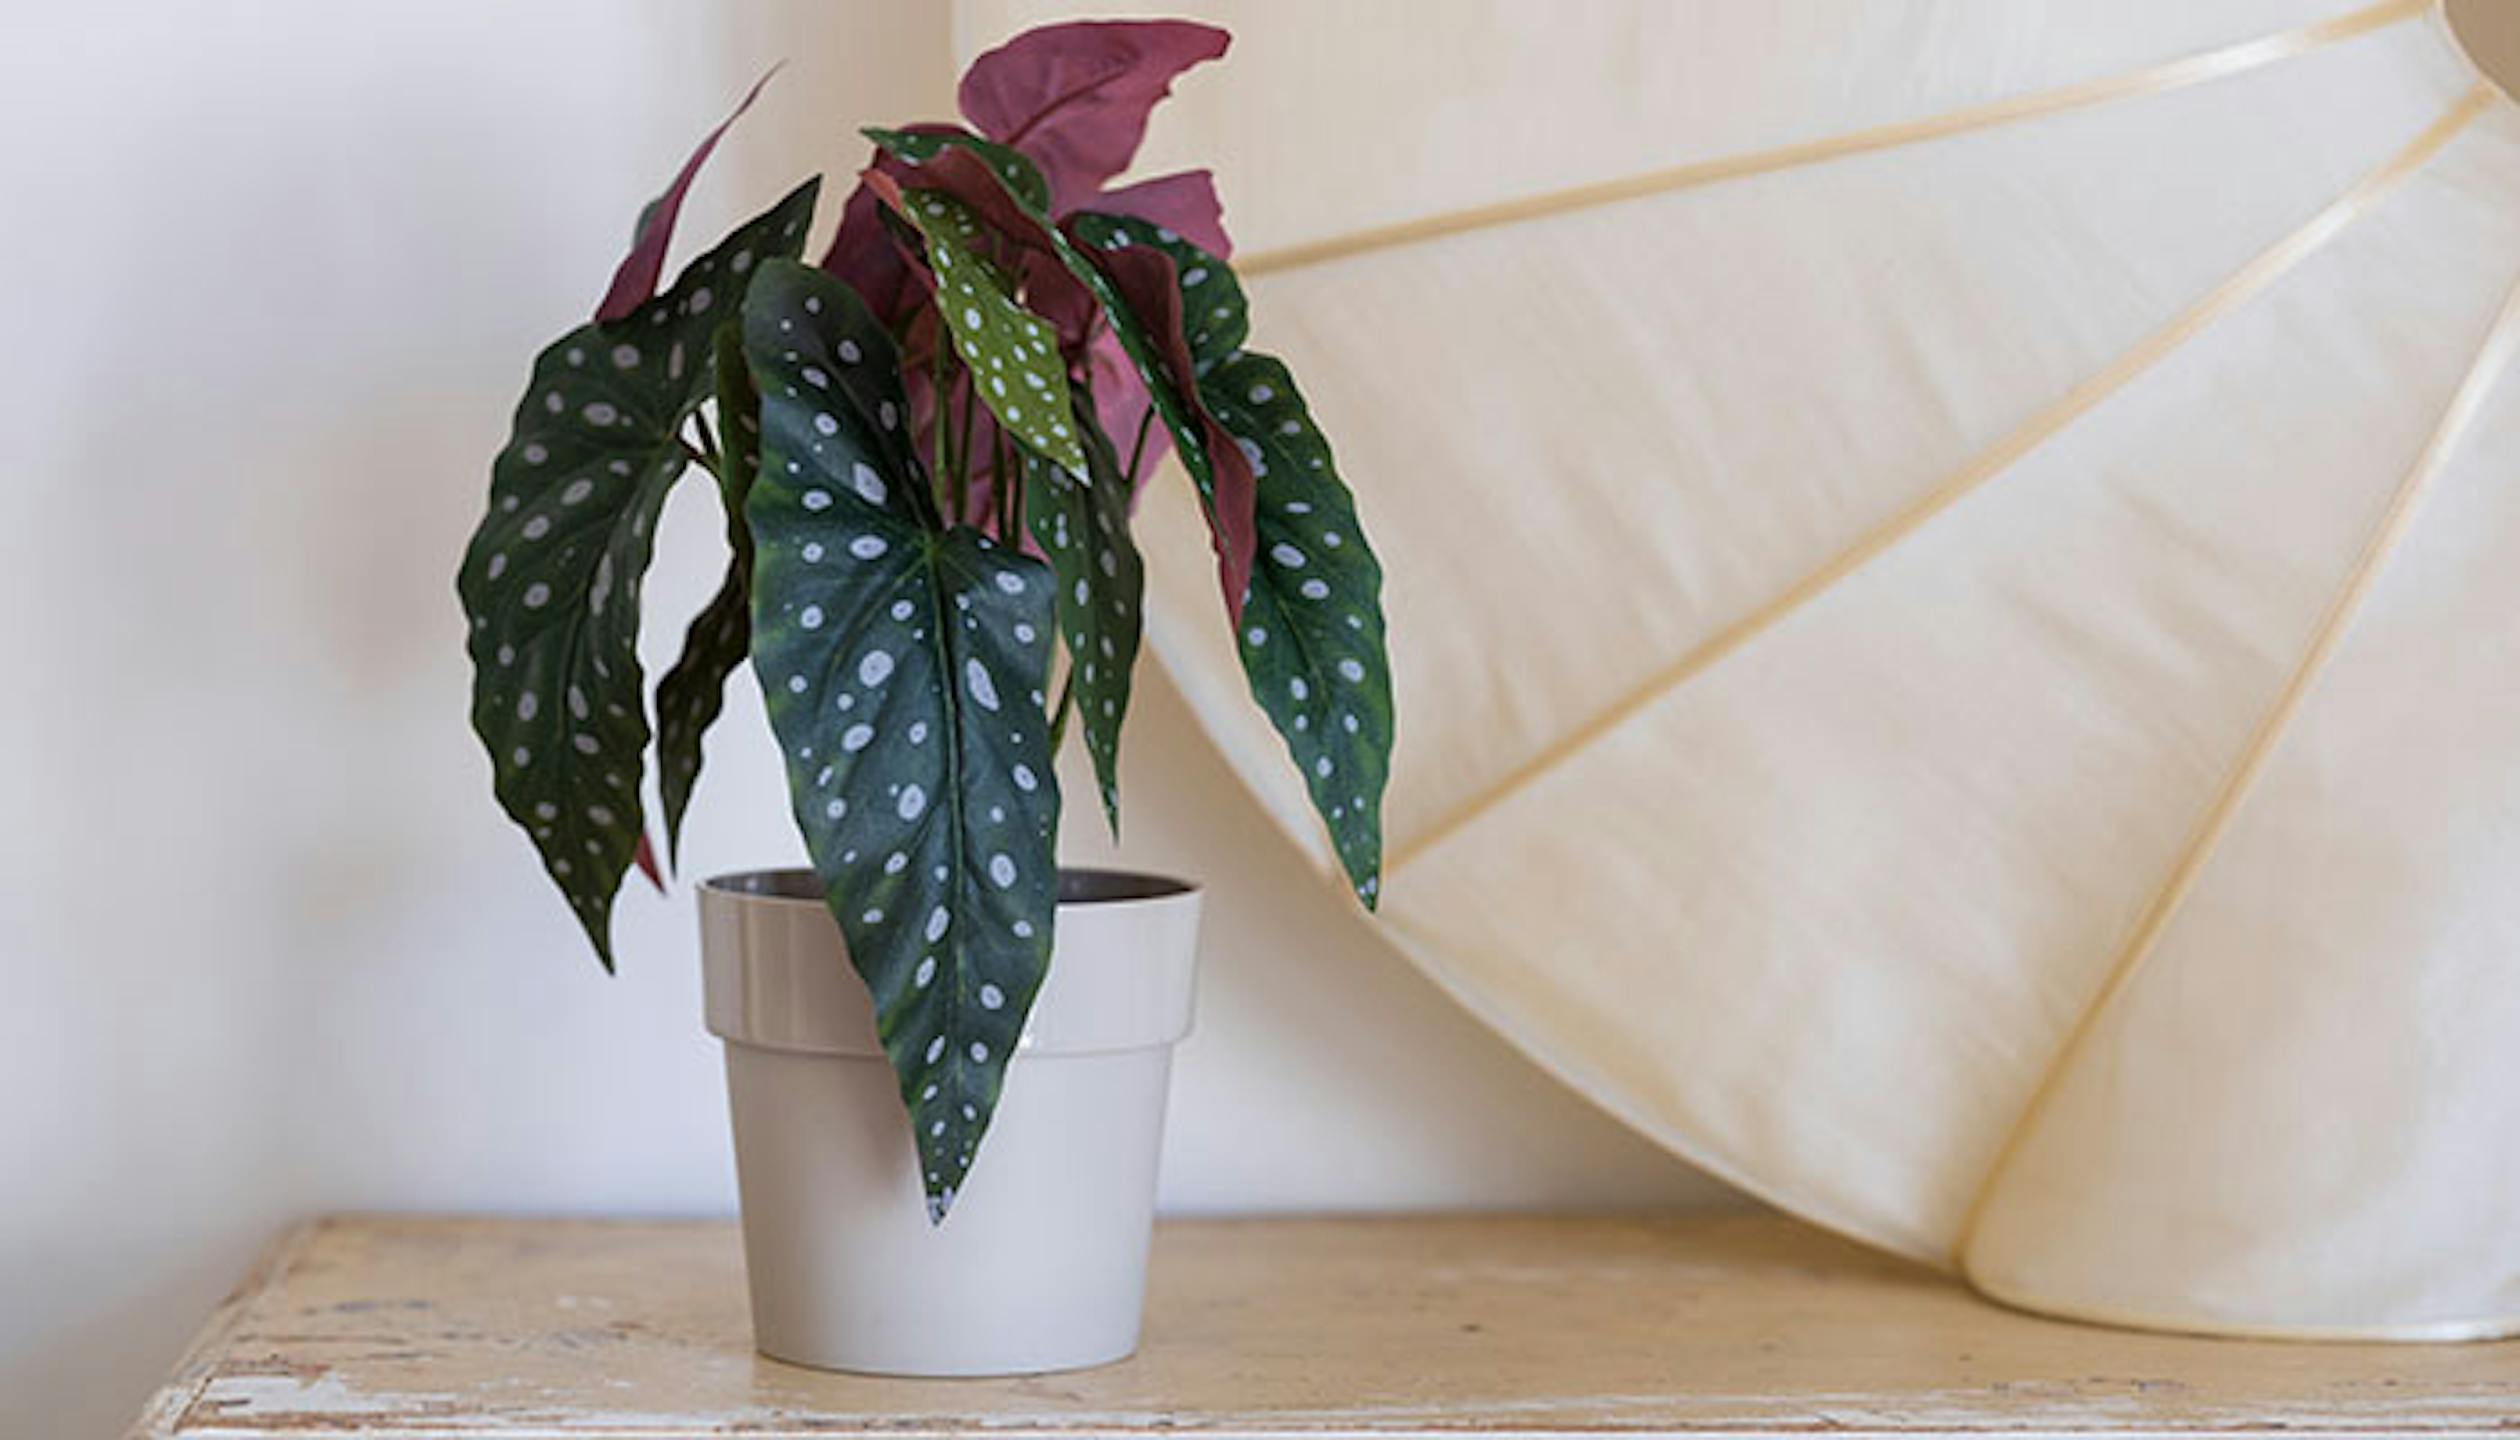 Faux begonia maculata houseplant by Blooming Artificial